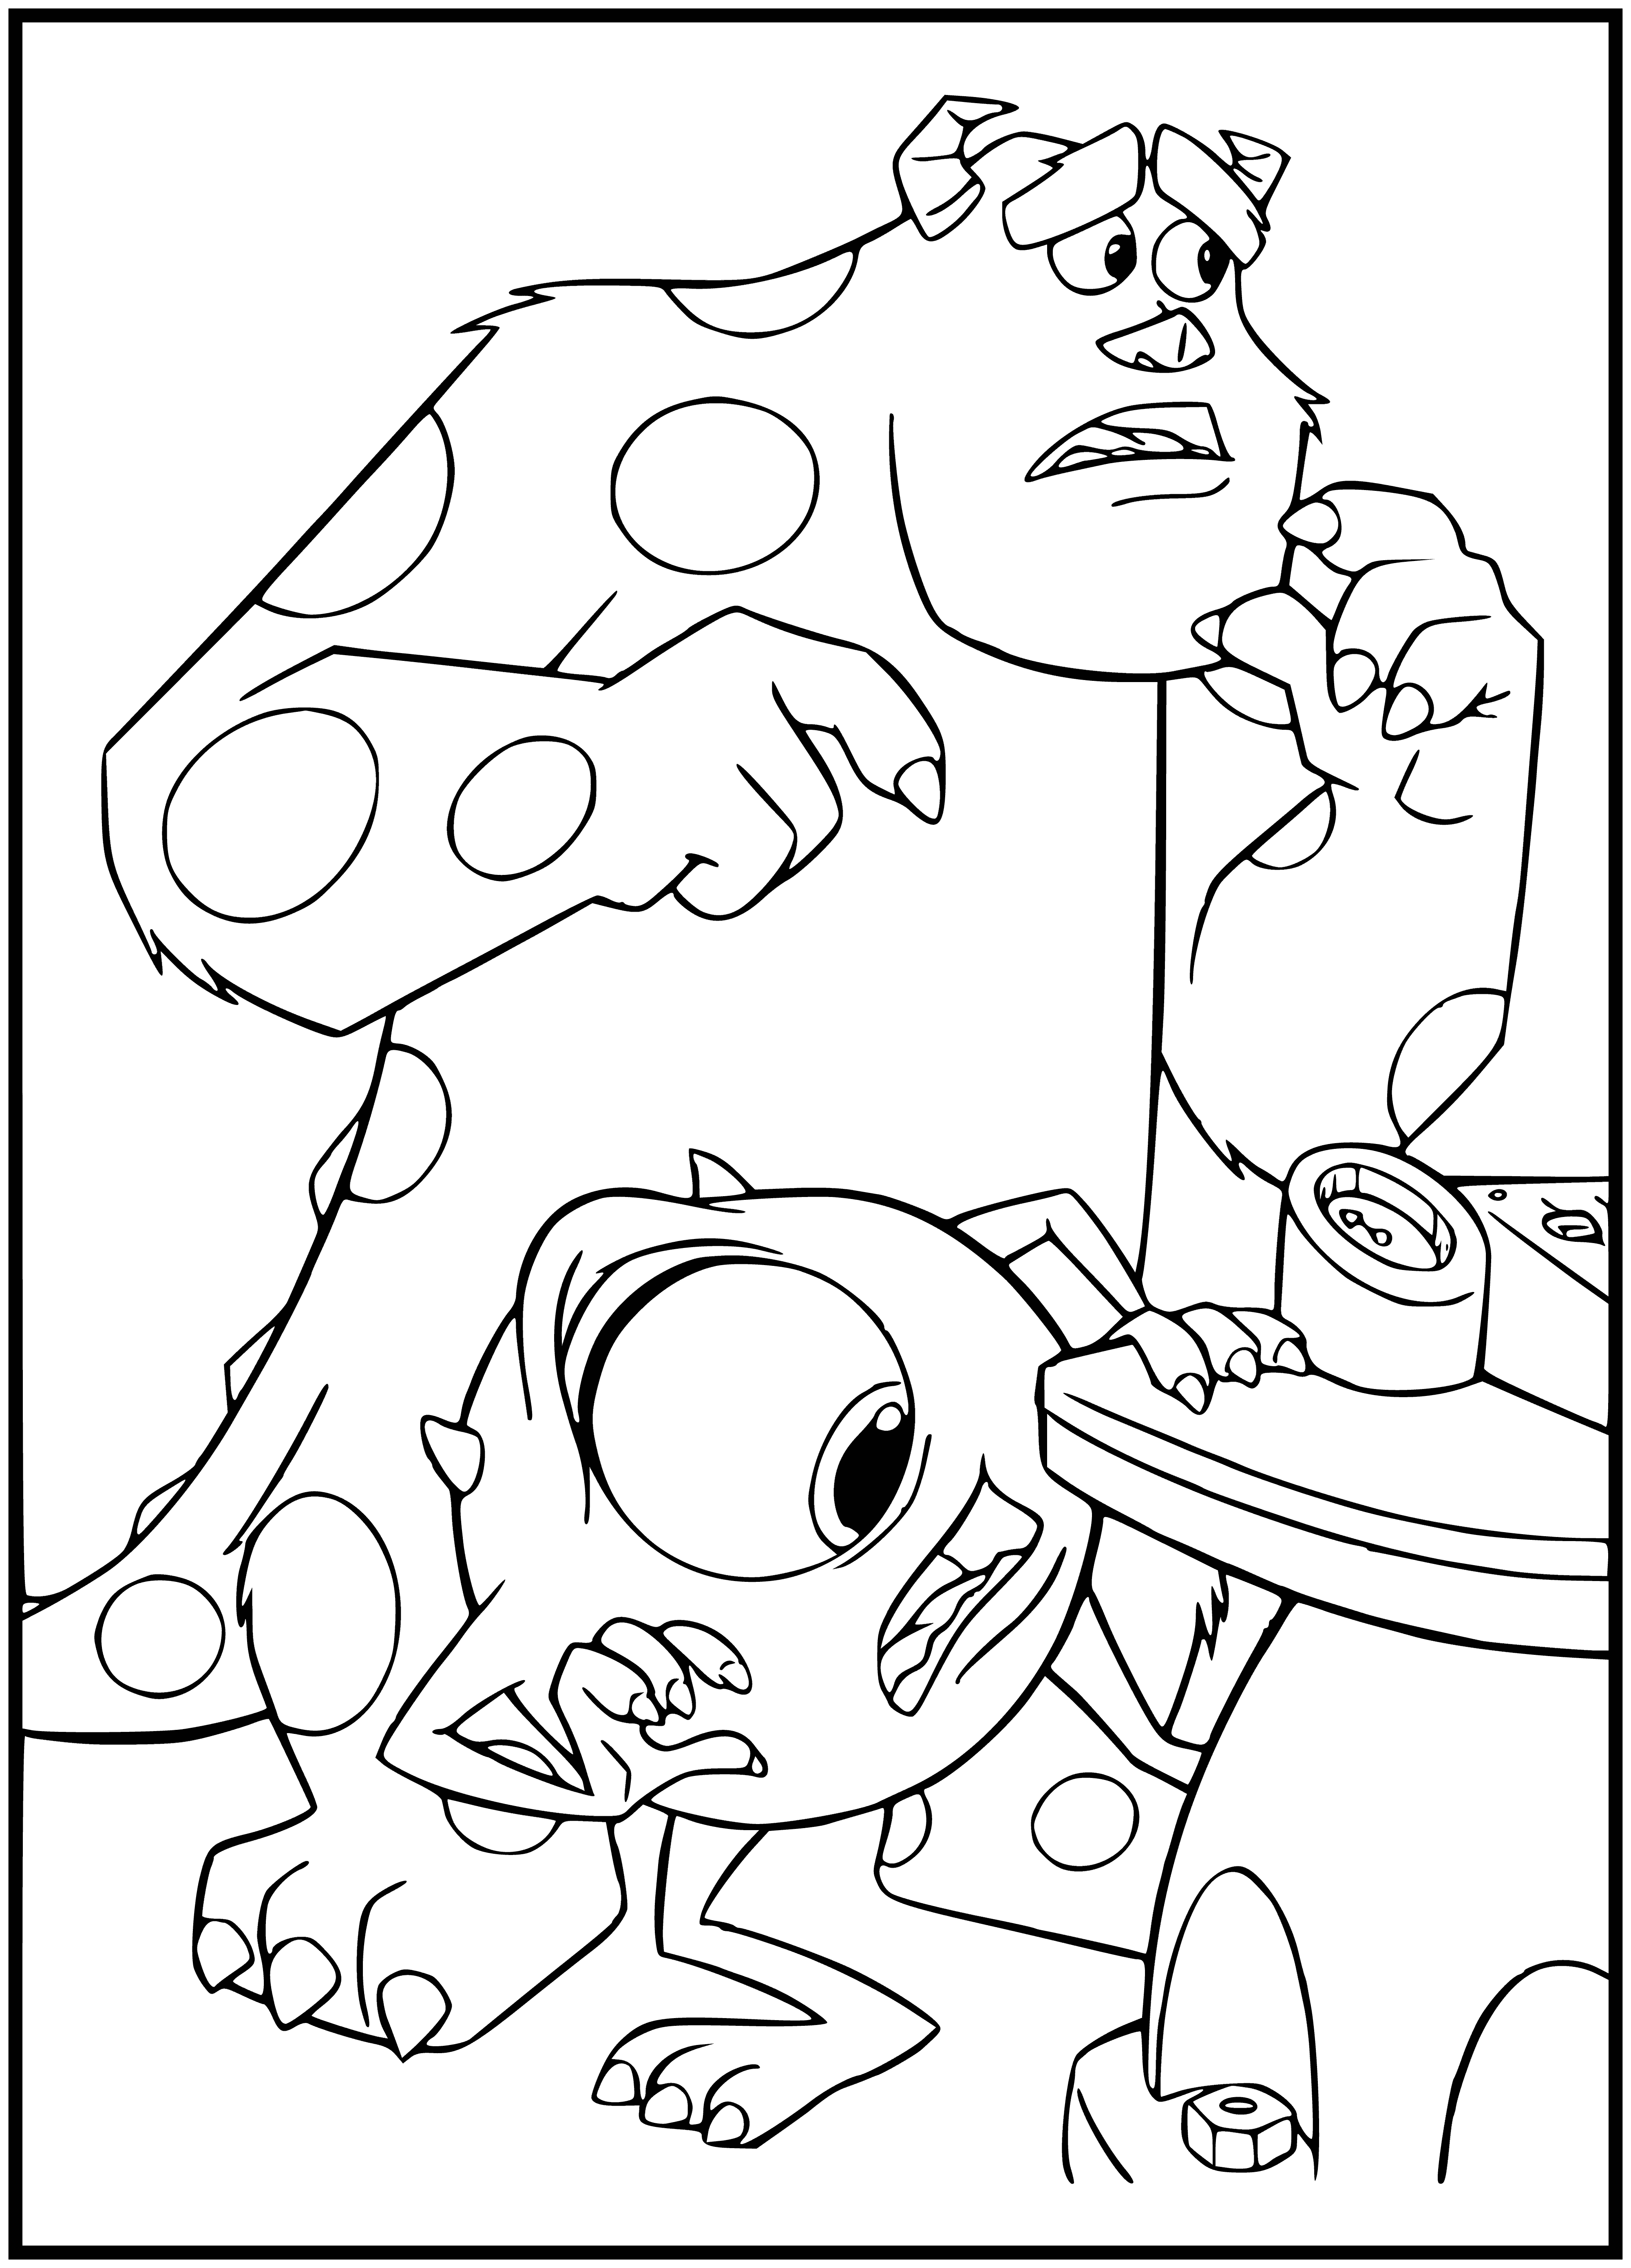 The scary story is lost coloring page